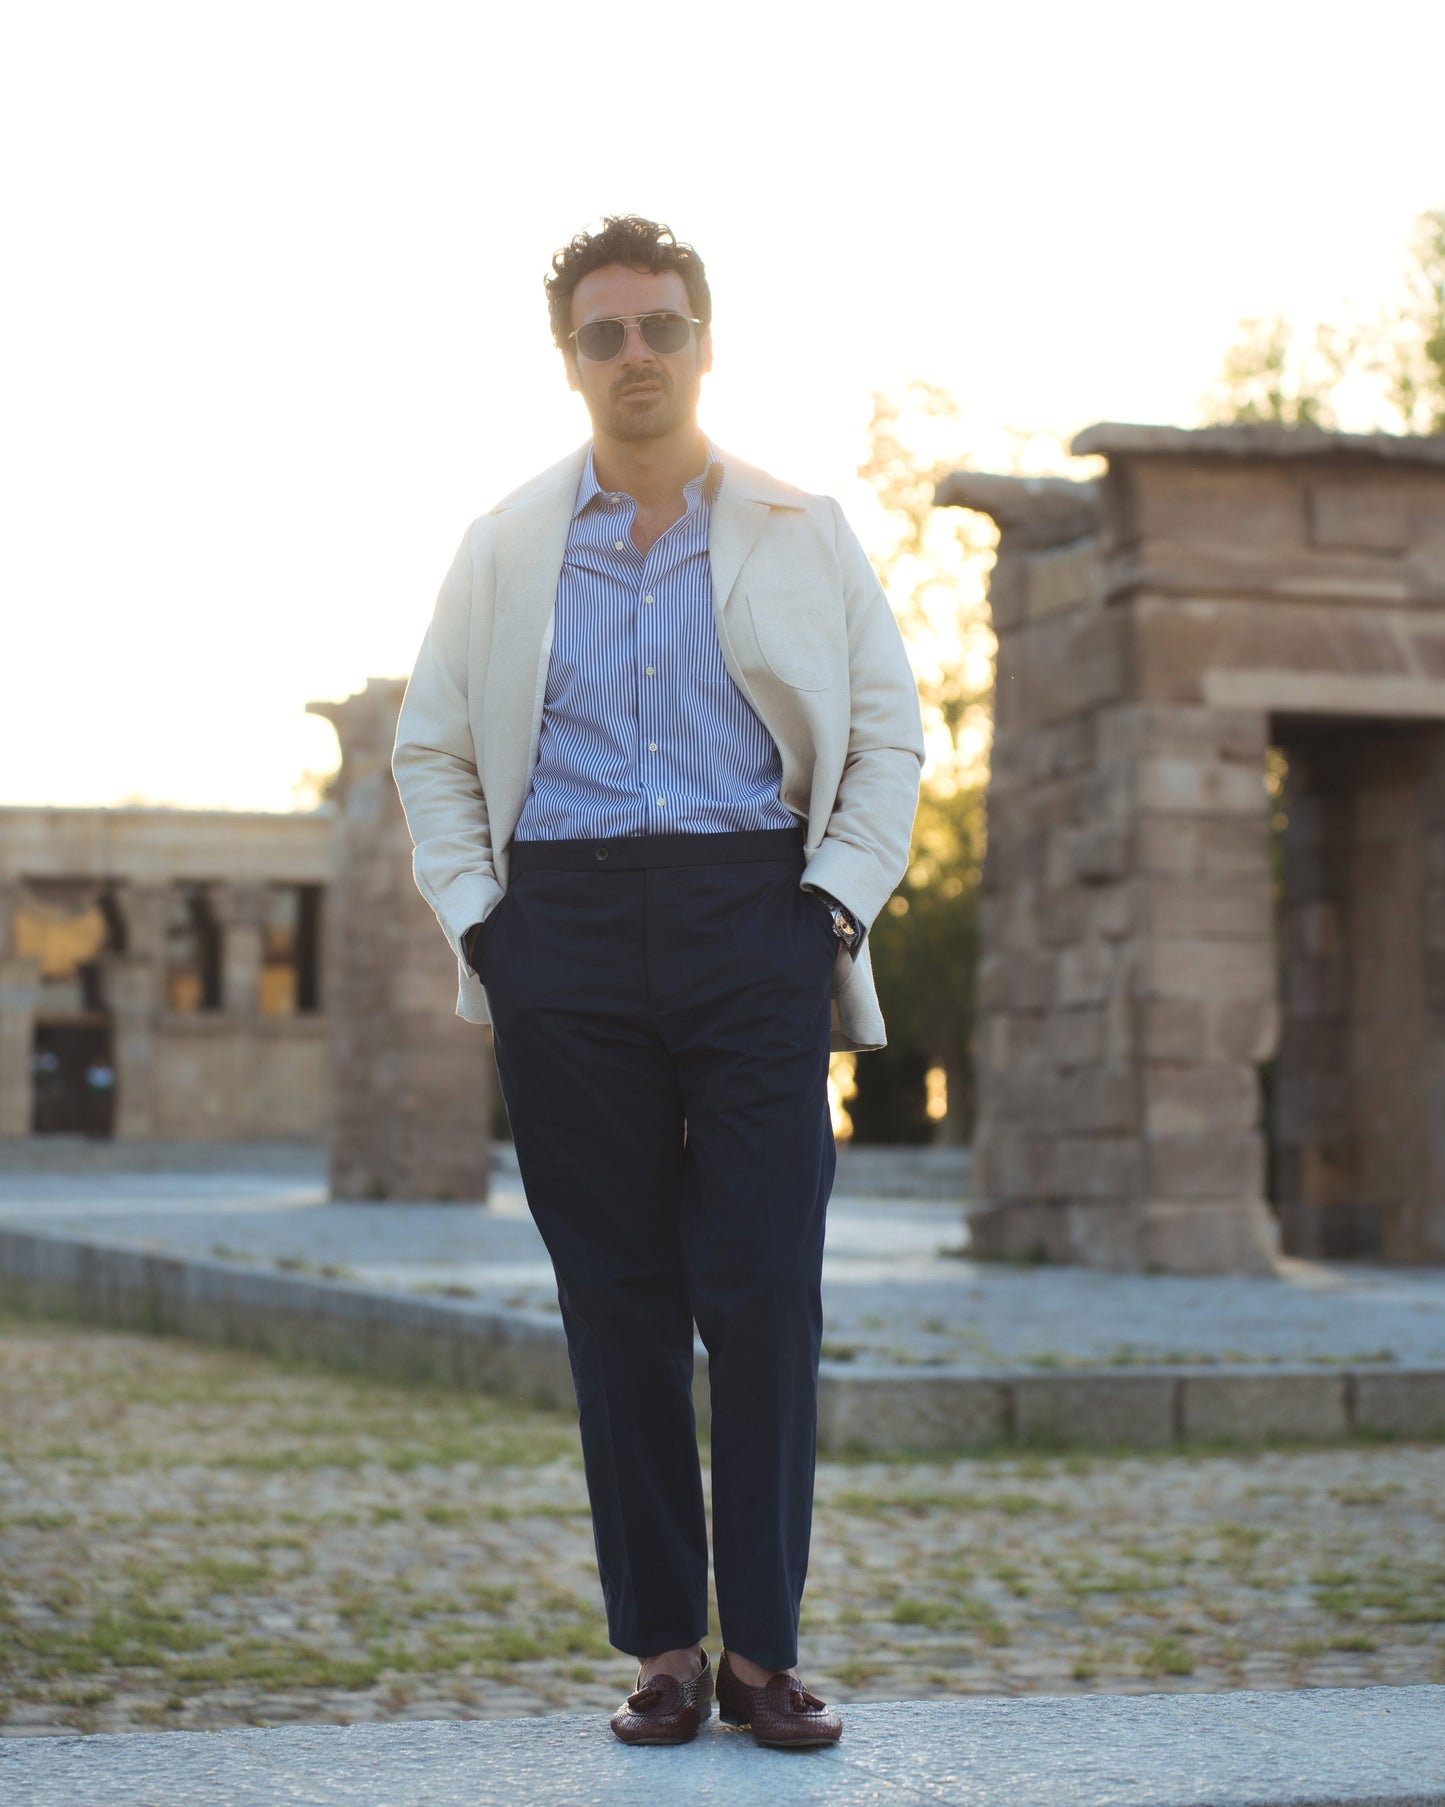 Model outside wearing the linen shirt jacket for men by Luxire in cream wearing striped shirt 10